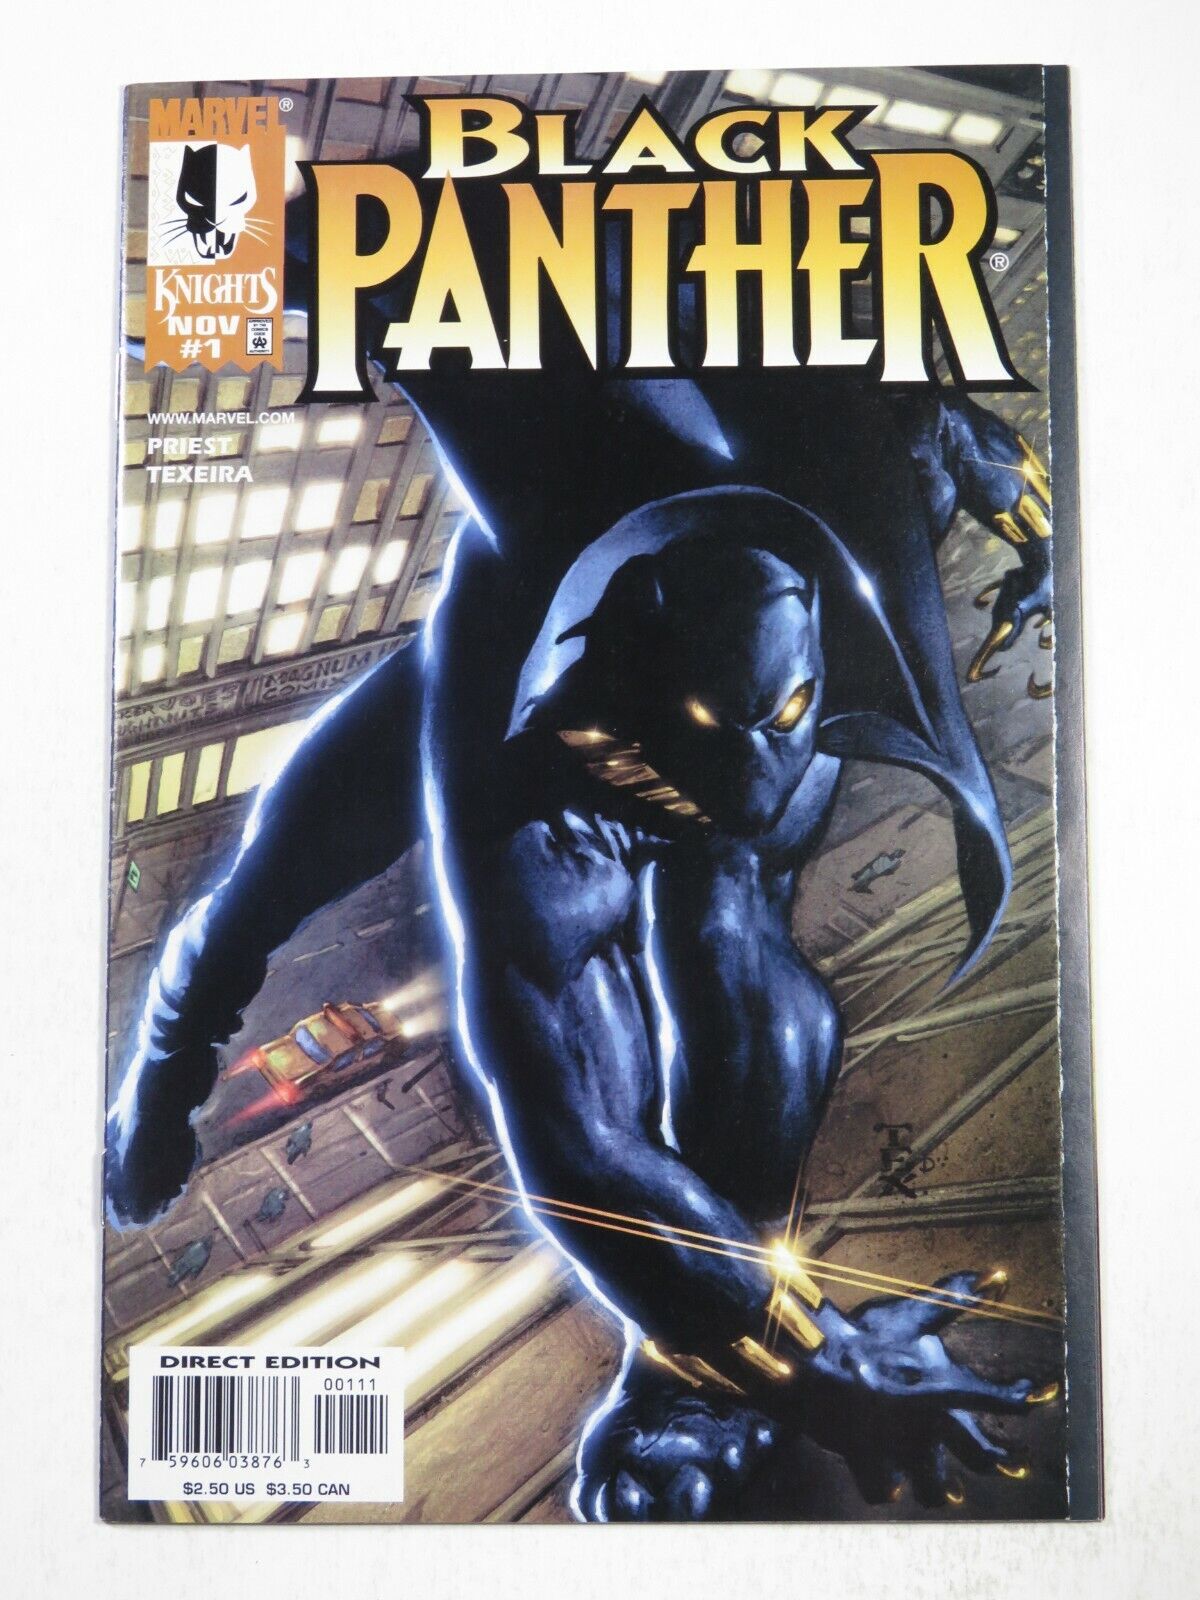 Black Panther #1 Marvel Knights 1998 Very Nice 1st Issue